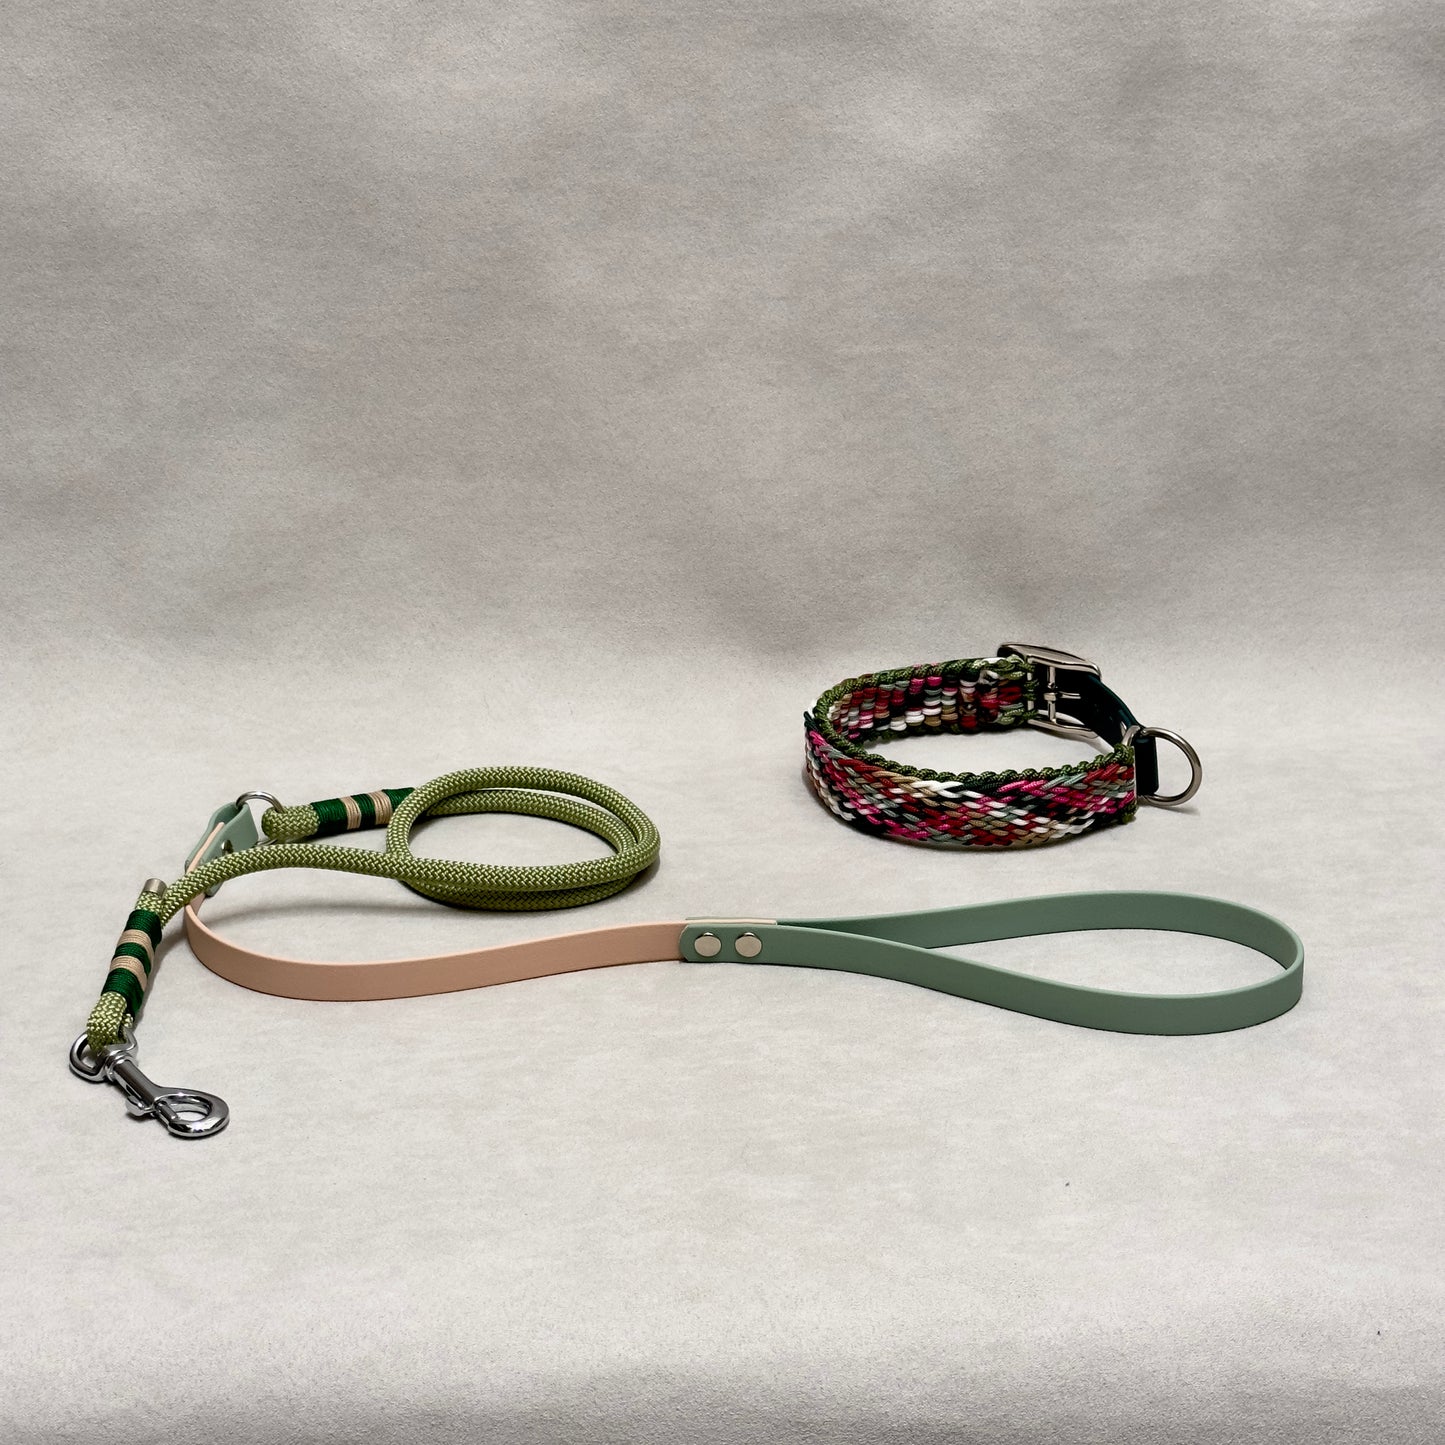 16mm single color rope and biothane leash